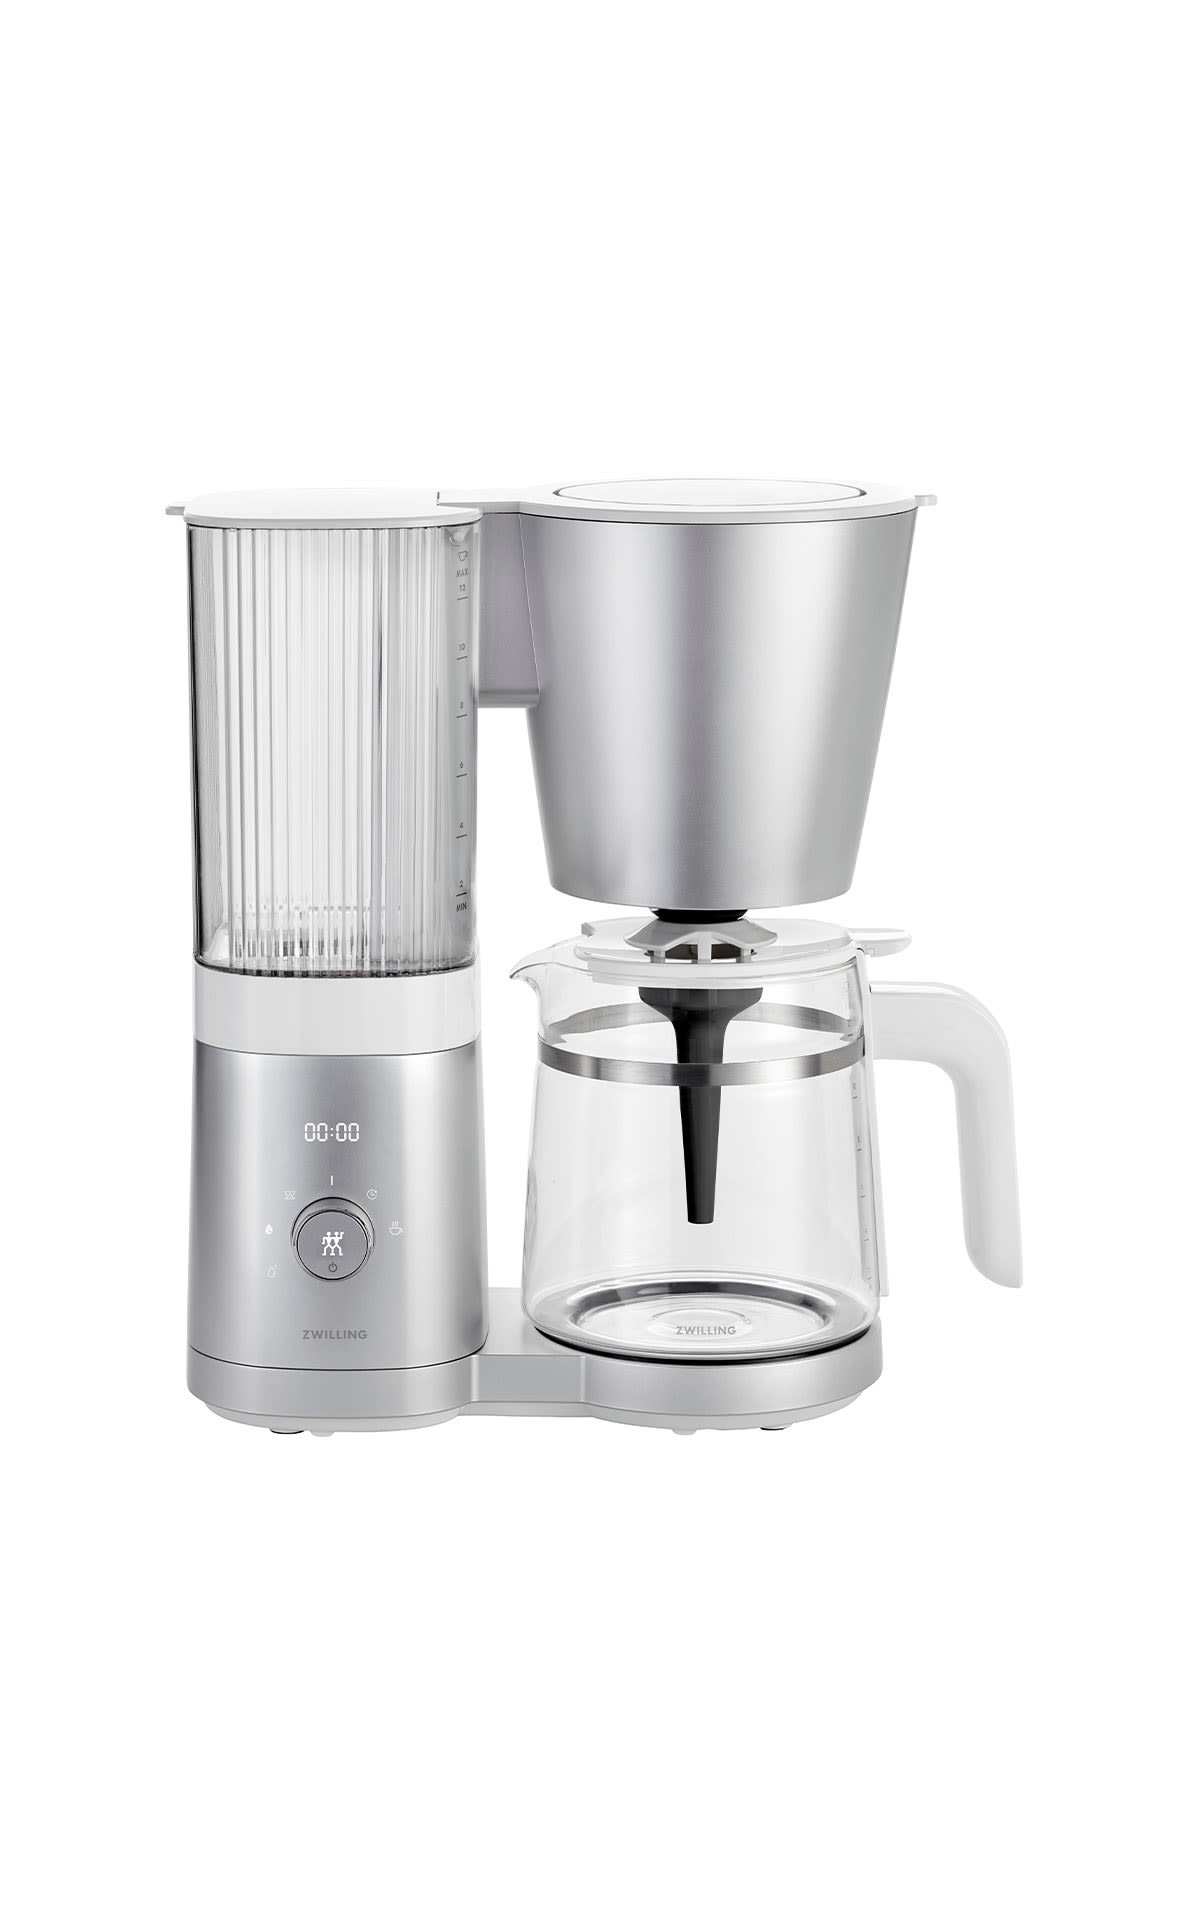 ZWILLING ENFINIGY drop coffee maker from Bicester Village